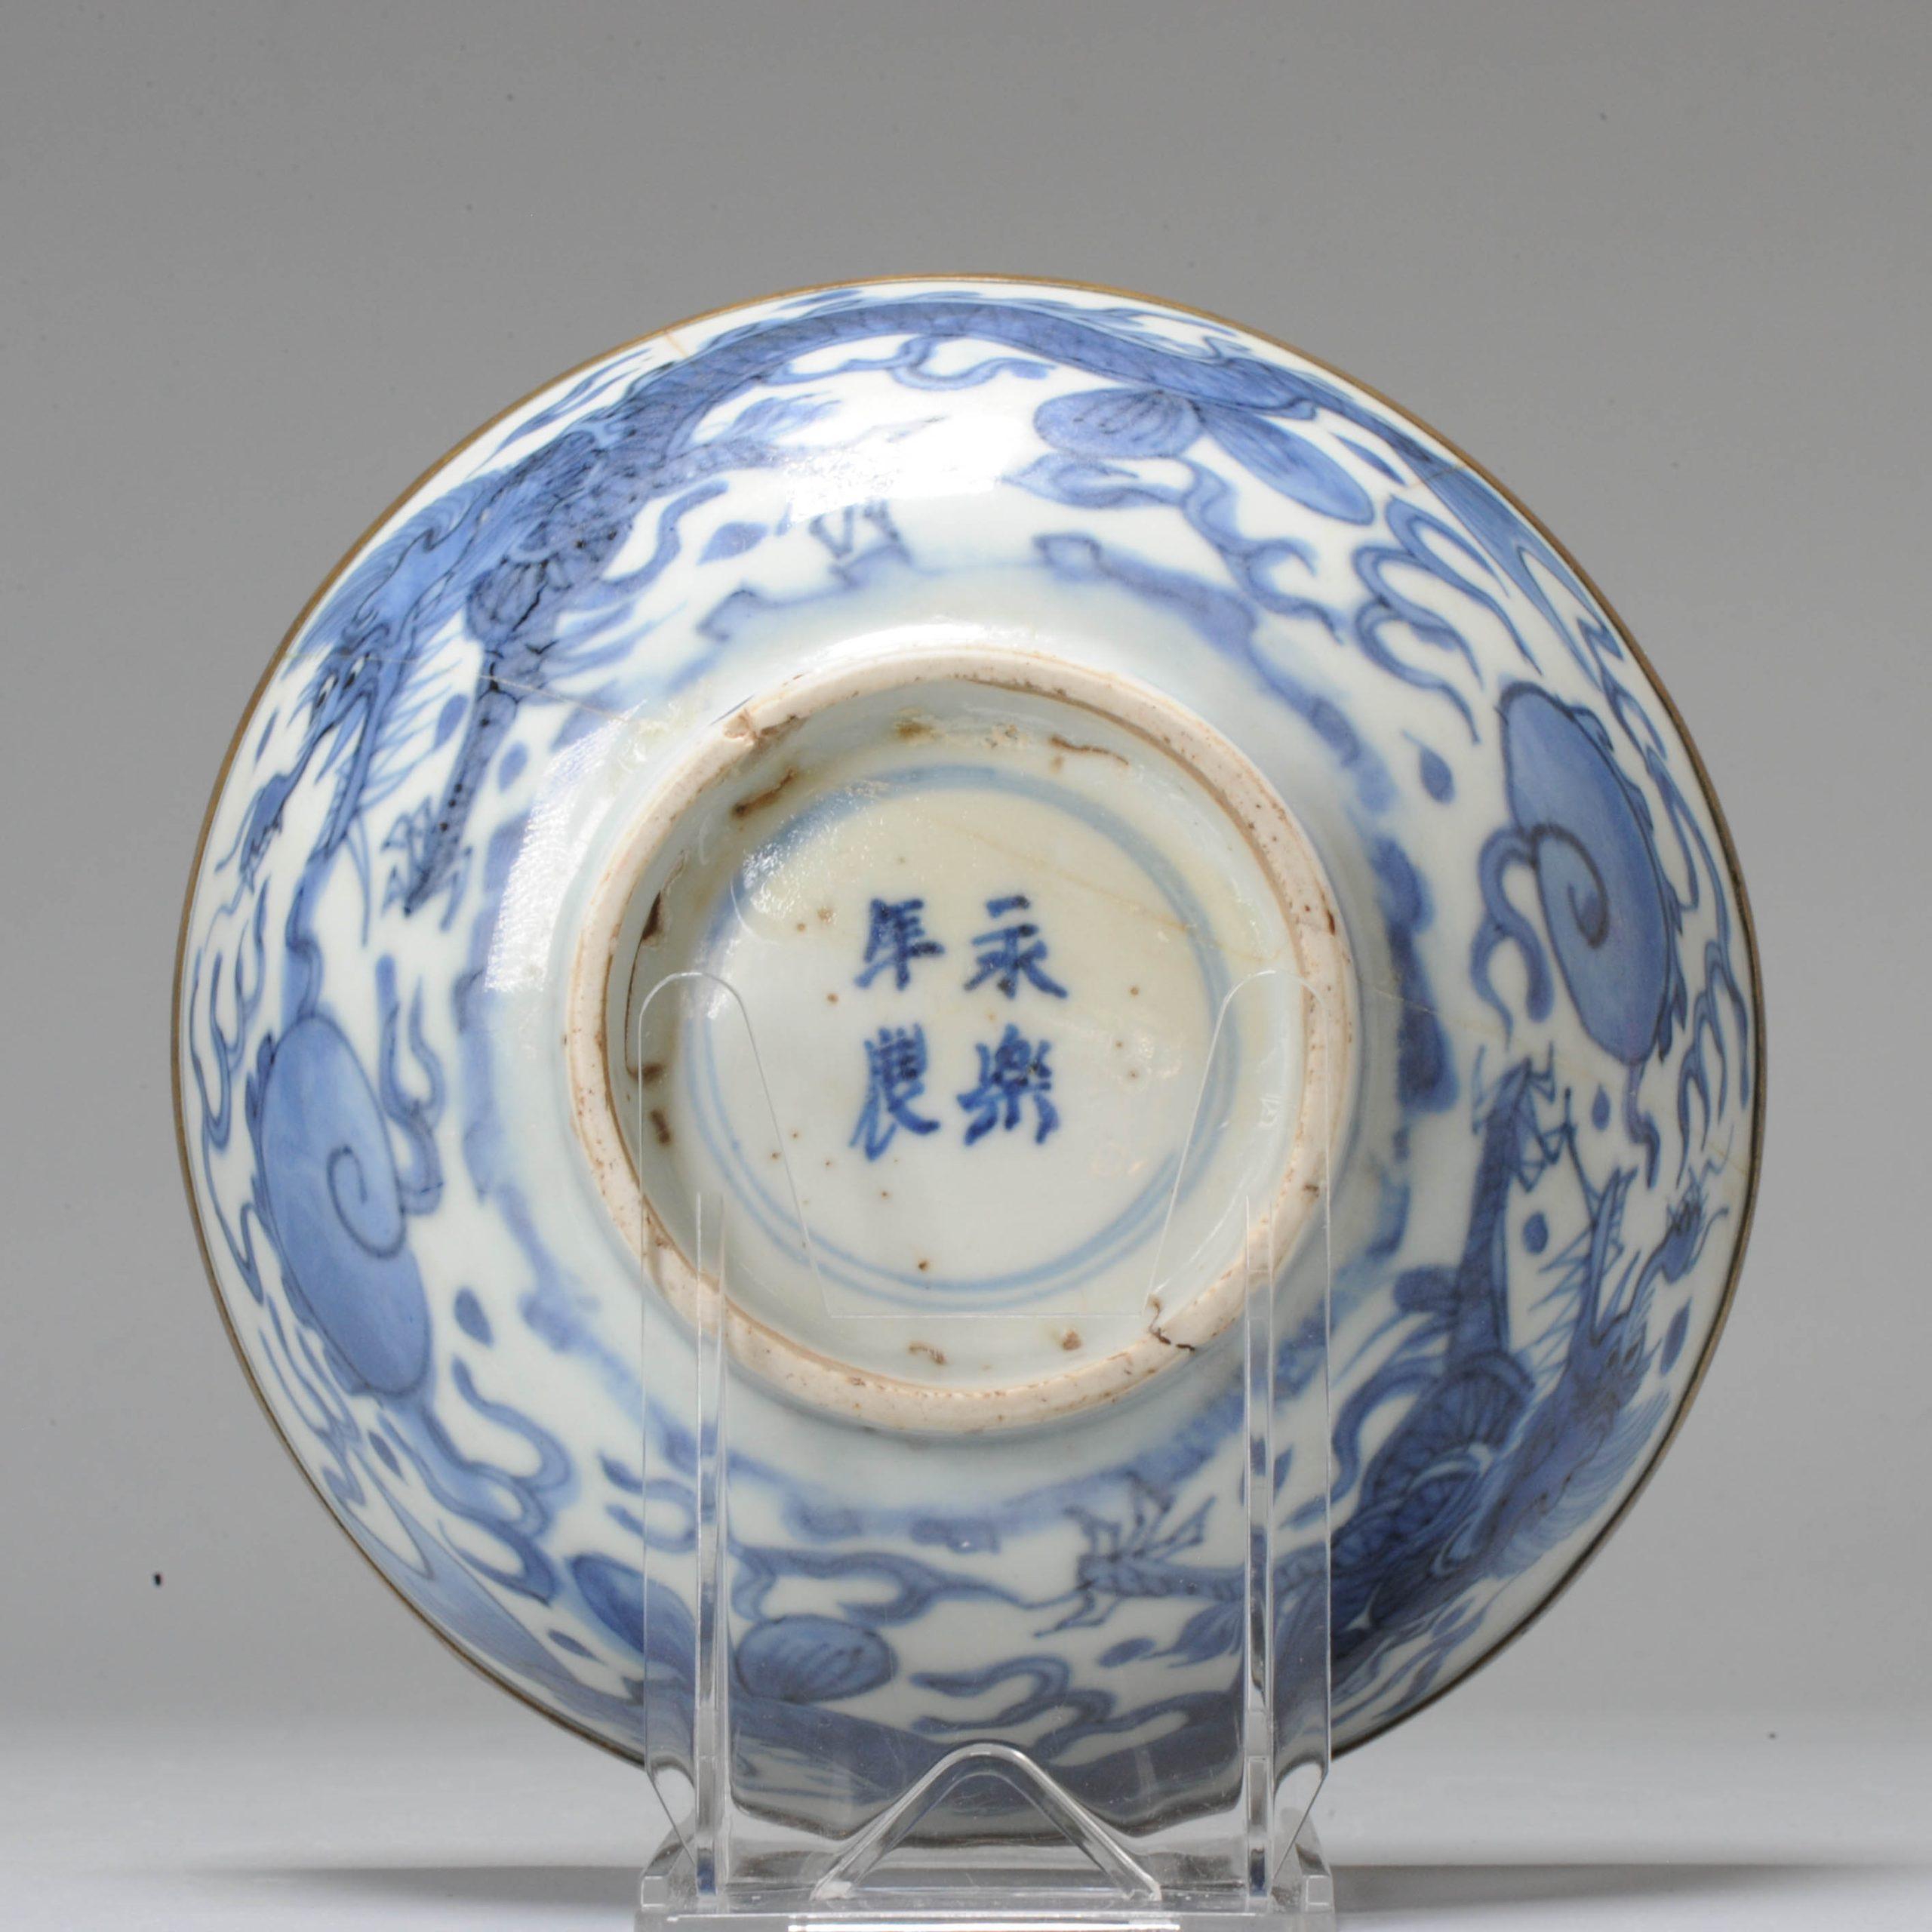 17th Century Ming Period Chinese Porcelain Blue White Bowl Dragons Marked 13